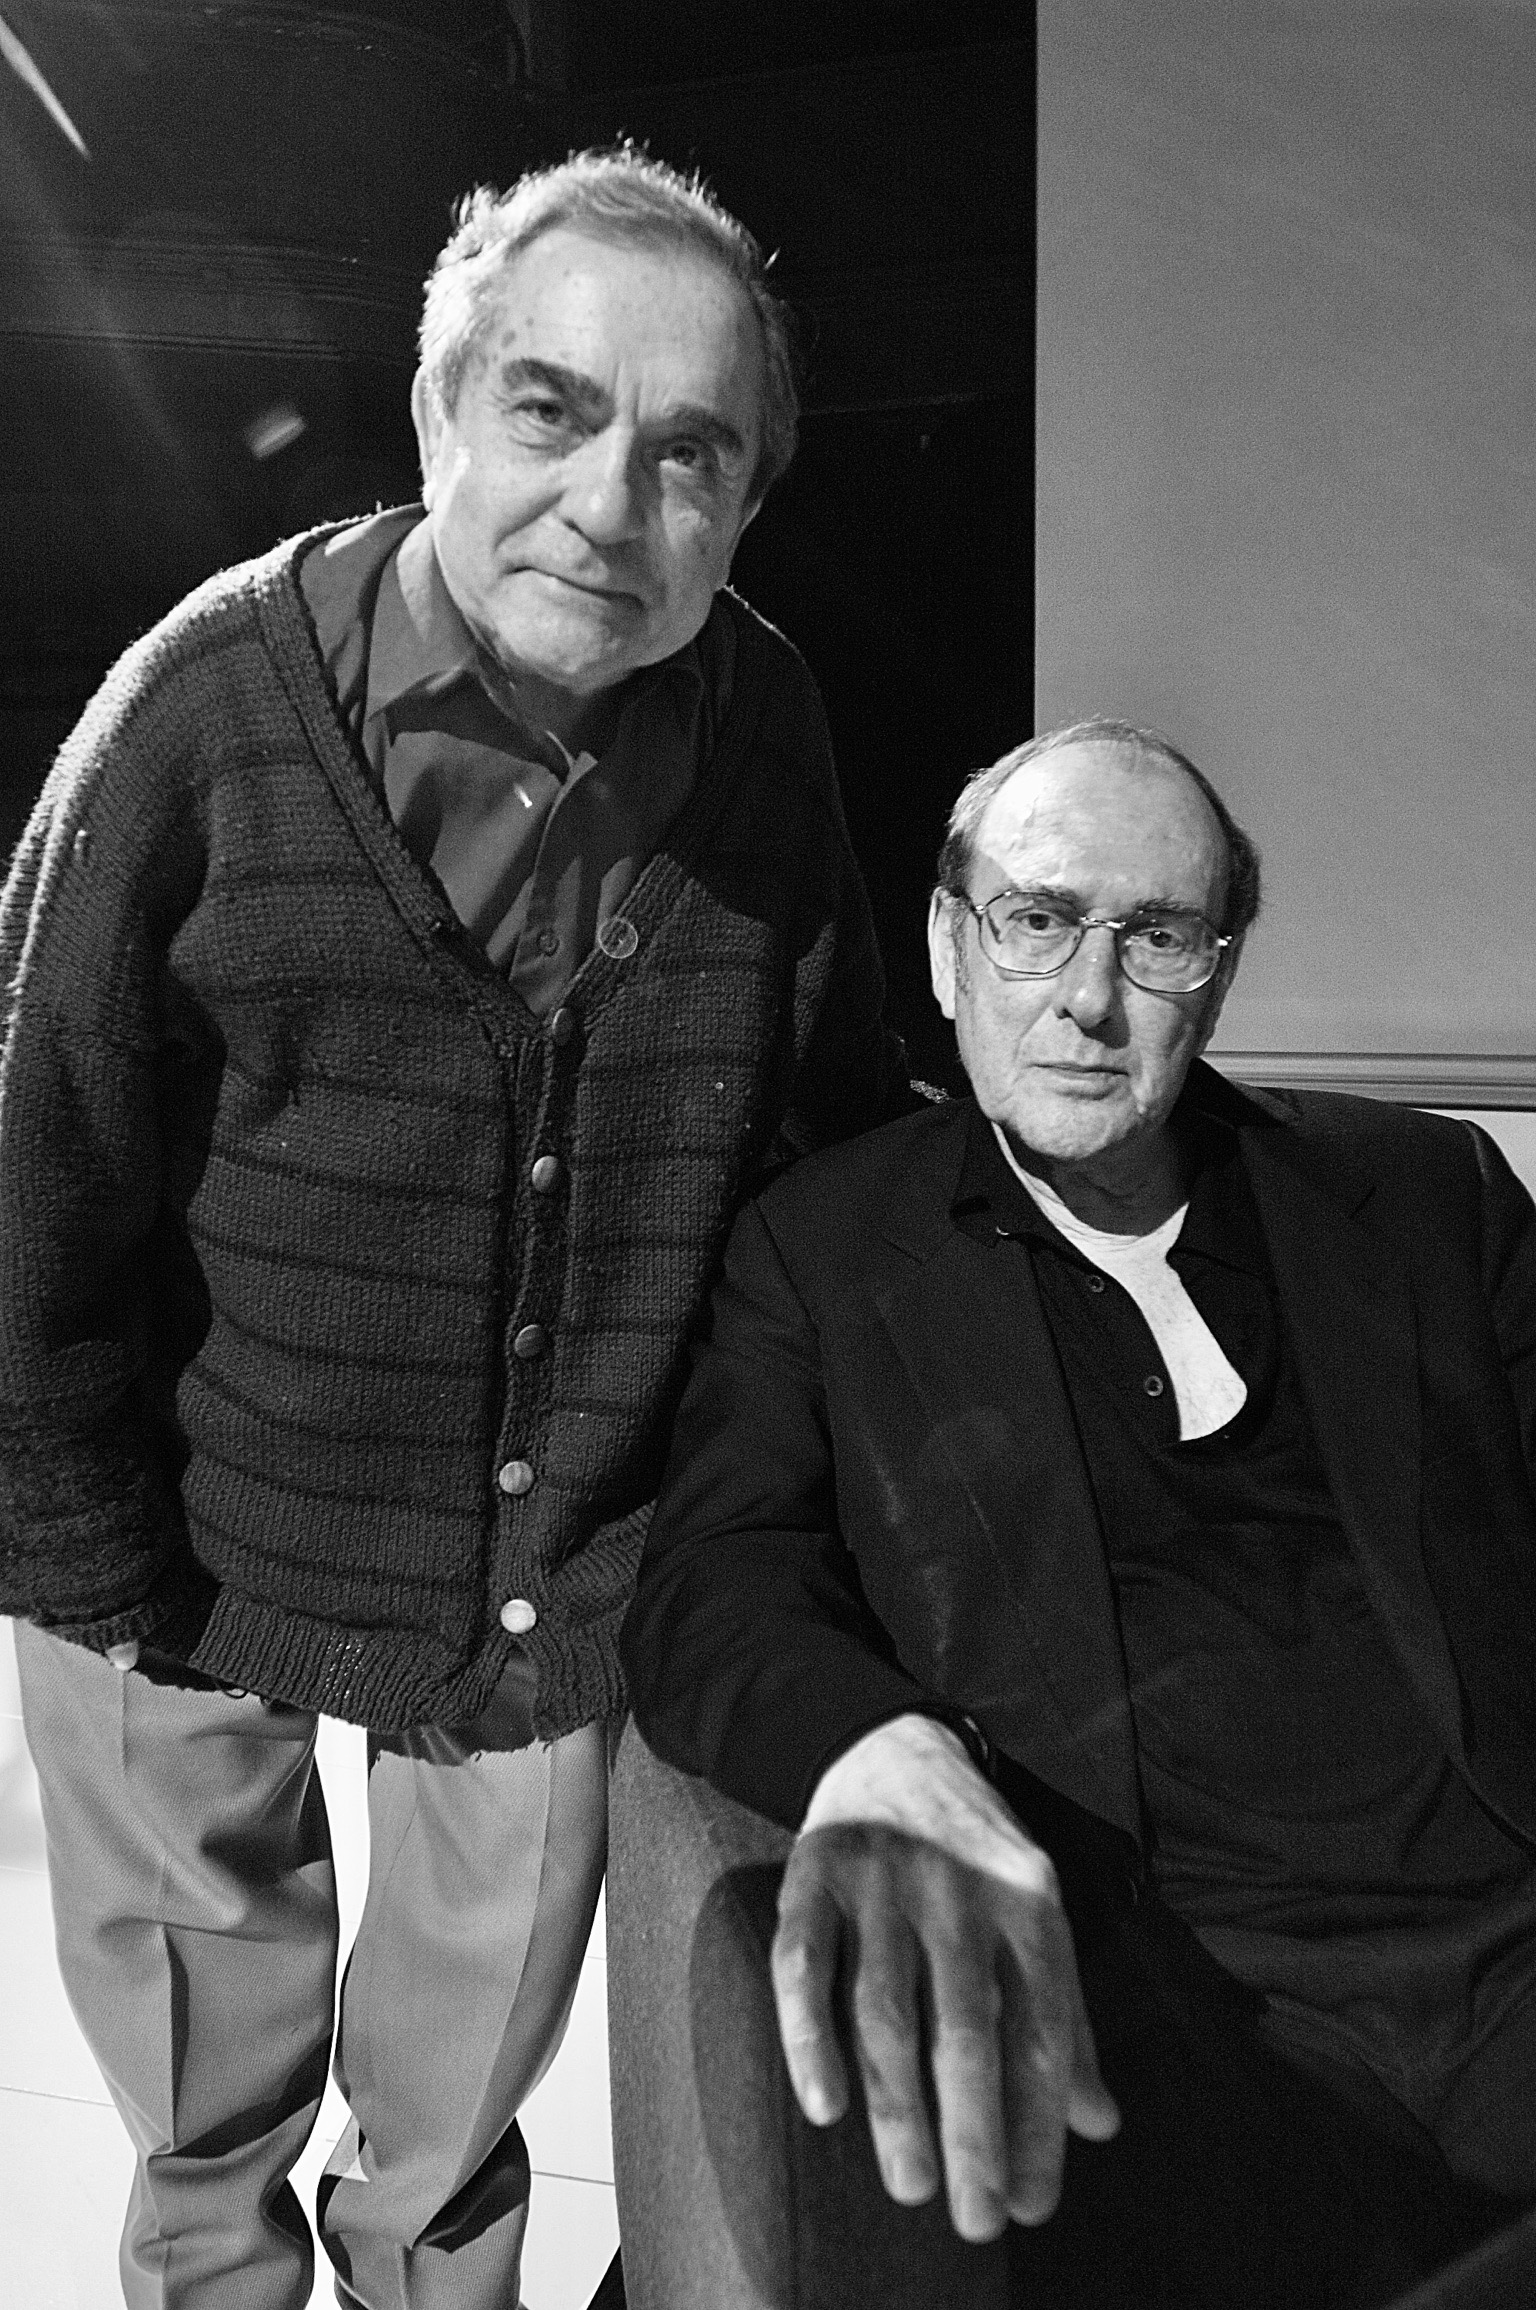 Harold Pinter and Henry Woolf, photographed by Gavin Watson